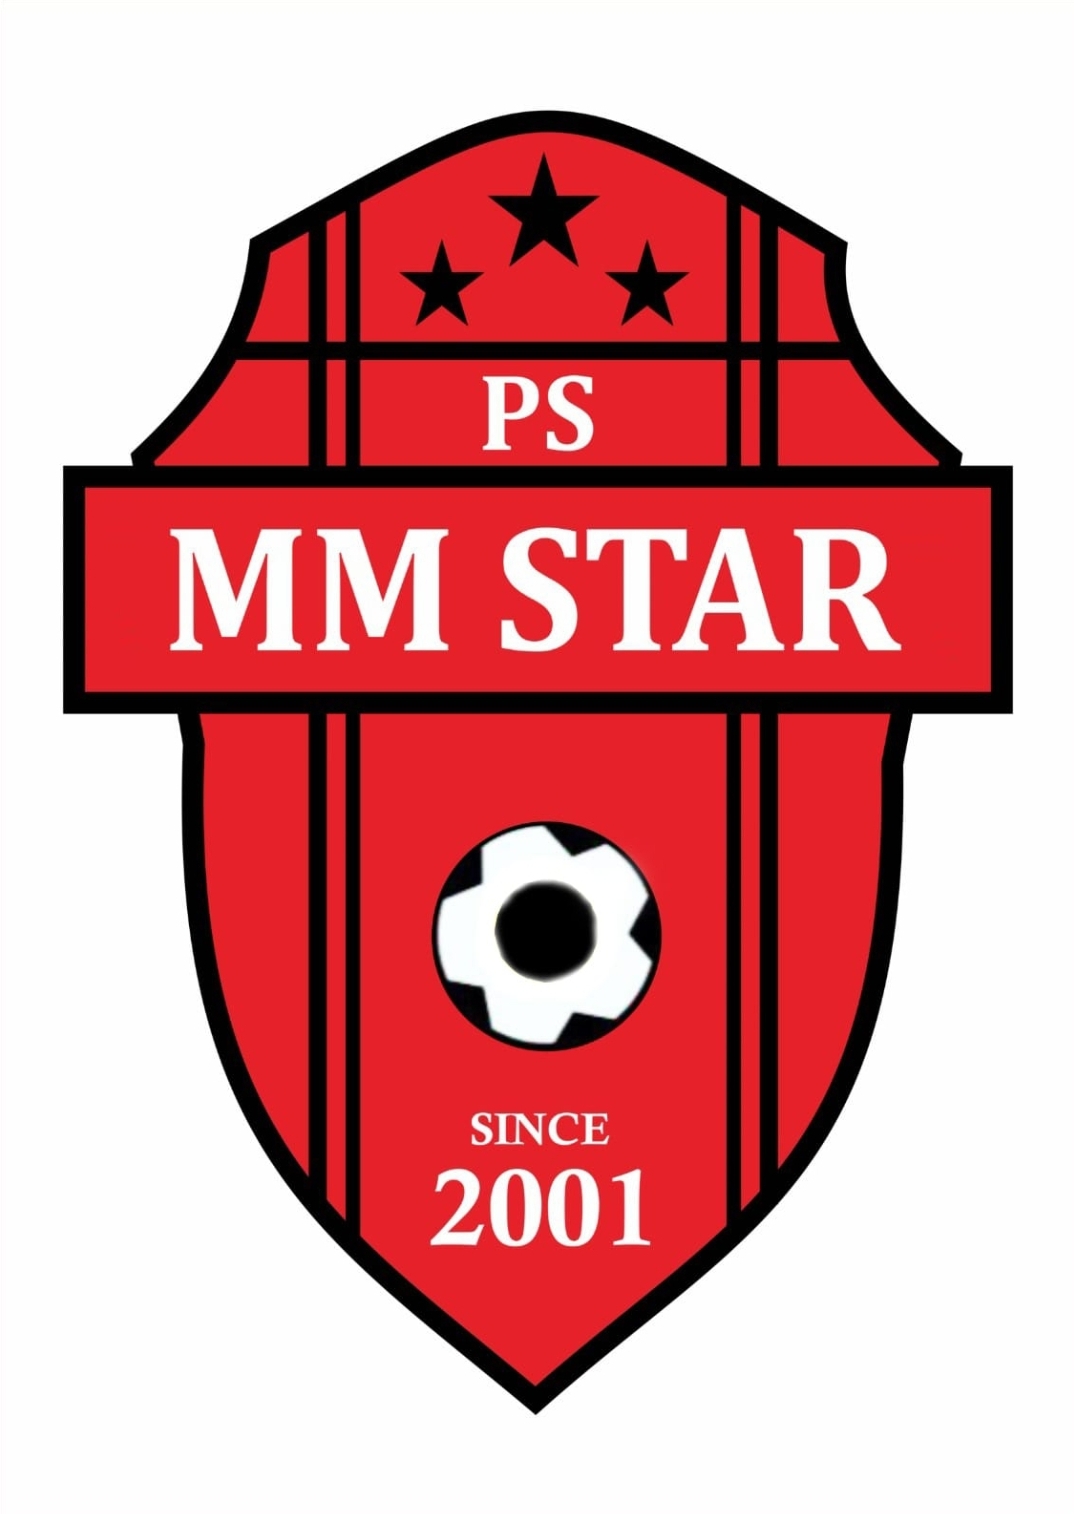 PS MM STAR